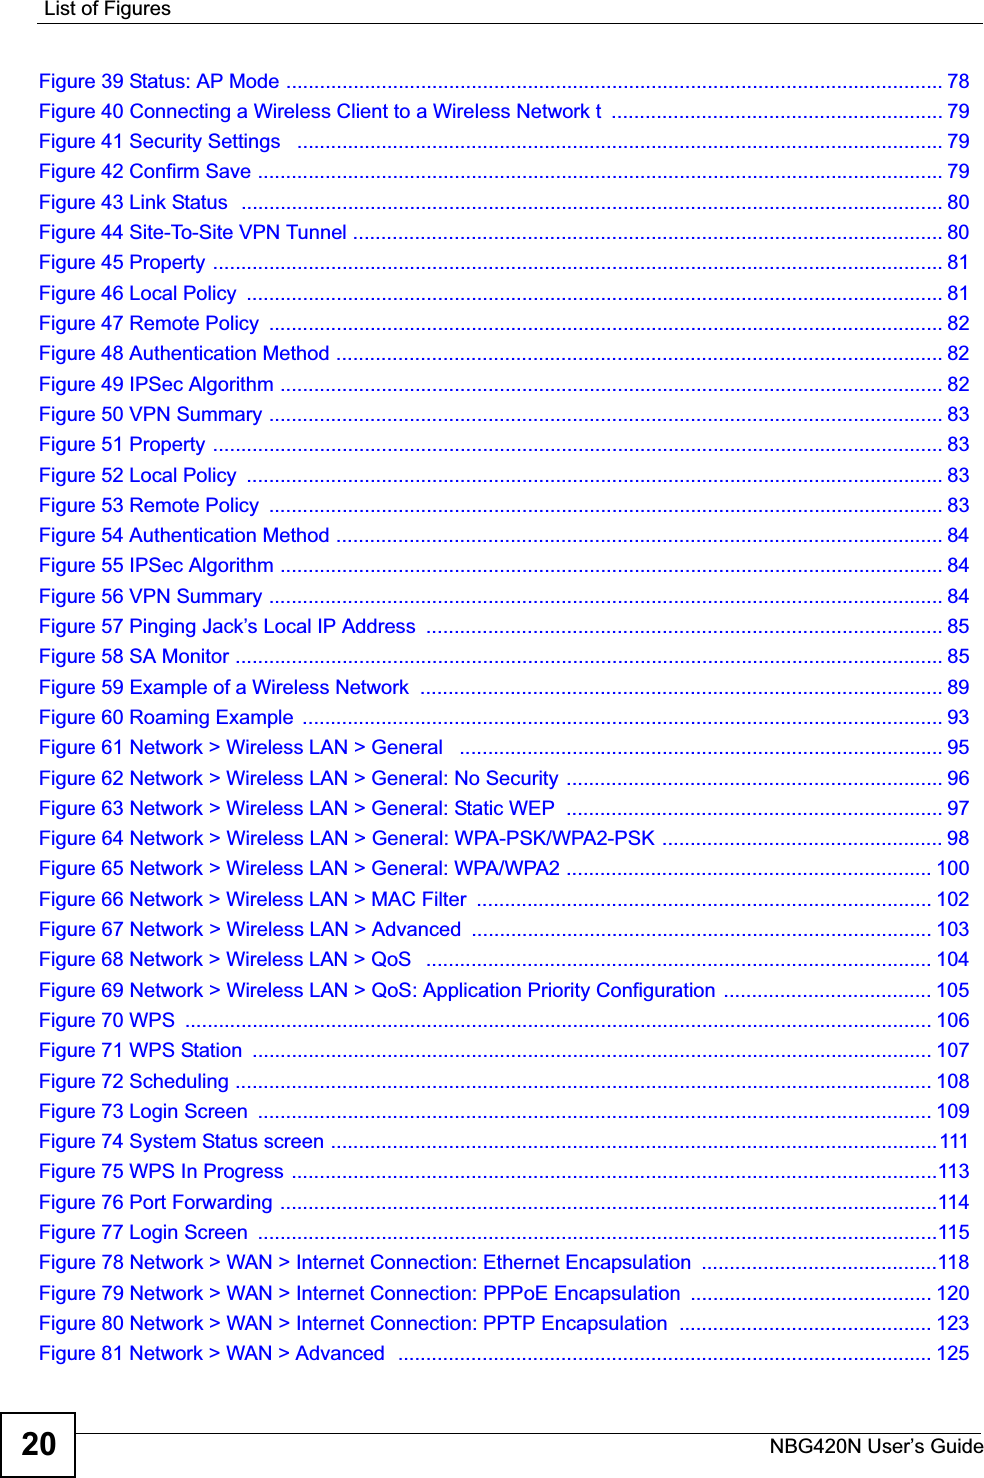 List of FiguresNBG420N User’s Guide20Figure 39 Status: AP Mode ..................................................................................................................... 78Figure 40 Connecting a Wireless Client to a Wireless Network t  ........................................................... 79Figure 41 Security Settings   ................................................................................................................... 79Figure 42 Confirm Save .......................................................................................................................... 79Figure 43 Link Status  ............................................................................................................................. 80Figure 44 Site-To-Site VPN Tunnel ......................................................................................................... 80Figure 45 Property .................................................................................................................................. 81Figure 46 Local Policy  ............................................................................................................................ 81Figure 47 Remote Policy  ........................................................................................................................ 82Figure 48 Authentication Method ............................................................................................................ 82Figure 49 IPSec Algorithm ...................................................................................................................... 82Figure 50 VPN Summary ........................................................................................................................ 83Figure 51 Property .................................................................................................................................. 83Figure 52 Local Policy  ............................................................................................................................ 83Figure 53 Remote Policy  ........................................................................................................................ 83Figure 54 Authentication Method ............................................................................................................ 84Figure 55 IPSec Algorithm ...................................................................................................................... 84Figure 56 VPN Summary ........................................................................................................................ 84Figure 57 Pinging Jack’s Local IP Address  ............................................................................................ 85Figure 58 SA Monitor .............................................................................................................................. 85Figure 59 Example of a Wireless Network  ............................................................................................. 89Figure 60 Roaming Example  .................................................................................................................. 93Figure 61 Network &gt; Wireless LAN &gt; General   ...................................................................................... 95Figure 62 Network &gt; Wireless LAN &gt; General: No Security ................................................................... 96Figure 63 Network &gt; Wireless LAN &gt; General: Static WEP  ................................................................... 97Figure 64 Network &gt; Wireless LAN &gt; General: WPA-PSK/WPA2-PSK .................................................. 98Figure 65 Network &gt; Wireless LAN &gt; General: WPA/WPA2 ................................................................. 100Figure 66 Network &gt; Wireless LAN &gt; MAC Filter  ................................................................................. 102Figure 67 Network &gt; Wireless LAN &gt; Advanced  .................................................................................. 103Figure 68 Network &gt; Wireless LAN &gt; QoS   .......................................................................................... 104Figure 69 Network &gt; Wireless LAN &gt; QoS: Application Priority Configuration ..................................... 105Figure 70 WPS  ..................................................................................................................................... 106Figure 71 WPS Station  ......................................................................................................................... 107Figure 72 Scheduling ............................................................................................................................ 108Figure 73 Login Screen  ........................................................................................................................ 109Figure 74 System Status screen ............................................................................................................111Figure 75 WPS In Progress ...................................................................................................................113Figure 76 Port Forwarding .....................................................................................................................114Figure 77 Login Screen  .........................................................................................................................115Figure 78 Network &gt; WAN &gt; Internet Connection: Ethernet Encapsulation  ..........................................118Figure 79 Network &gt; WAN &gt; Internet Connection: PPPoE Encapsulation  ........................................... 120Figure 80 Network &gt; WAN &gt; Internet Connection: PPTP Encapsulation  ............................................. 123Figure 81 Network &gt; WAN &gt; Advanced  ............................................................................................... 125